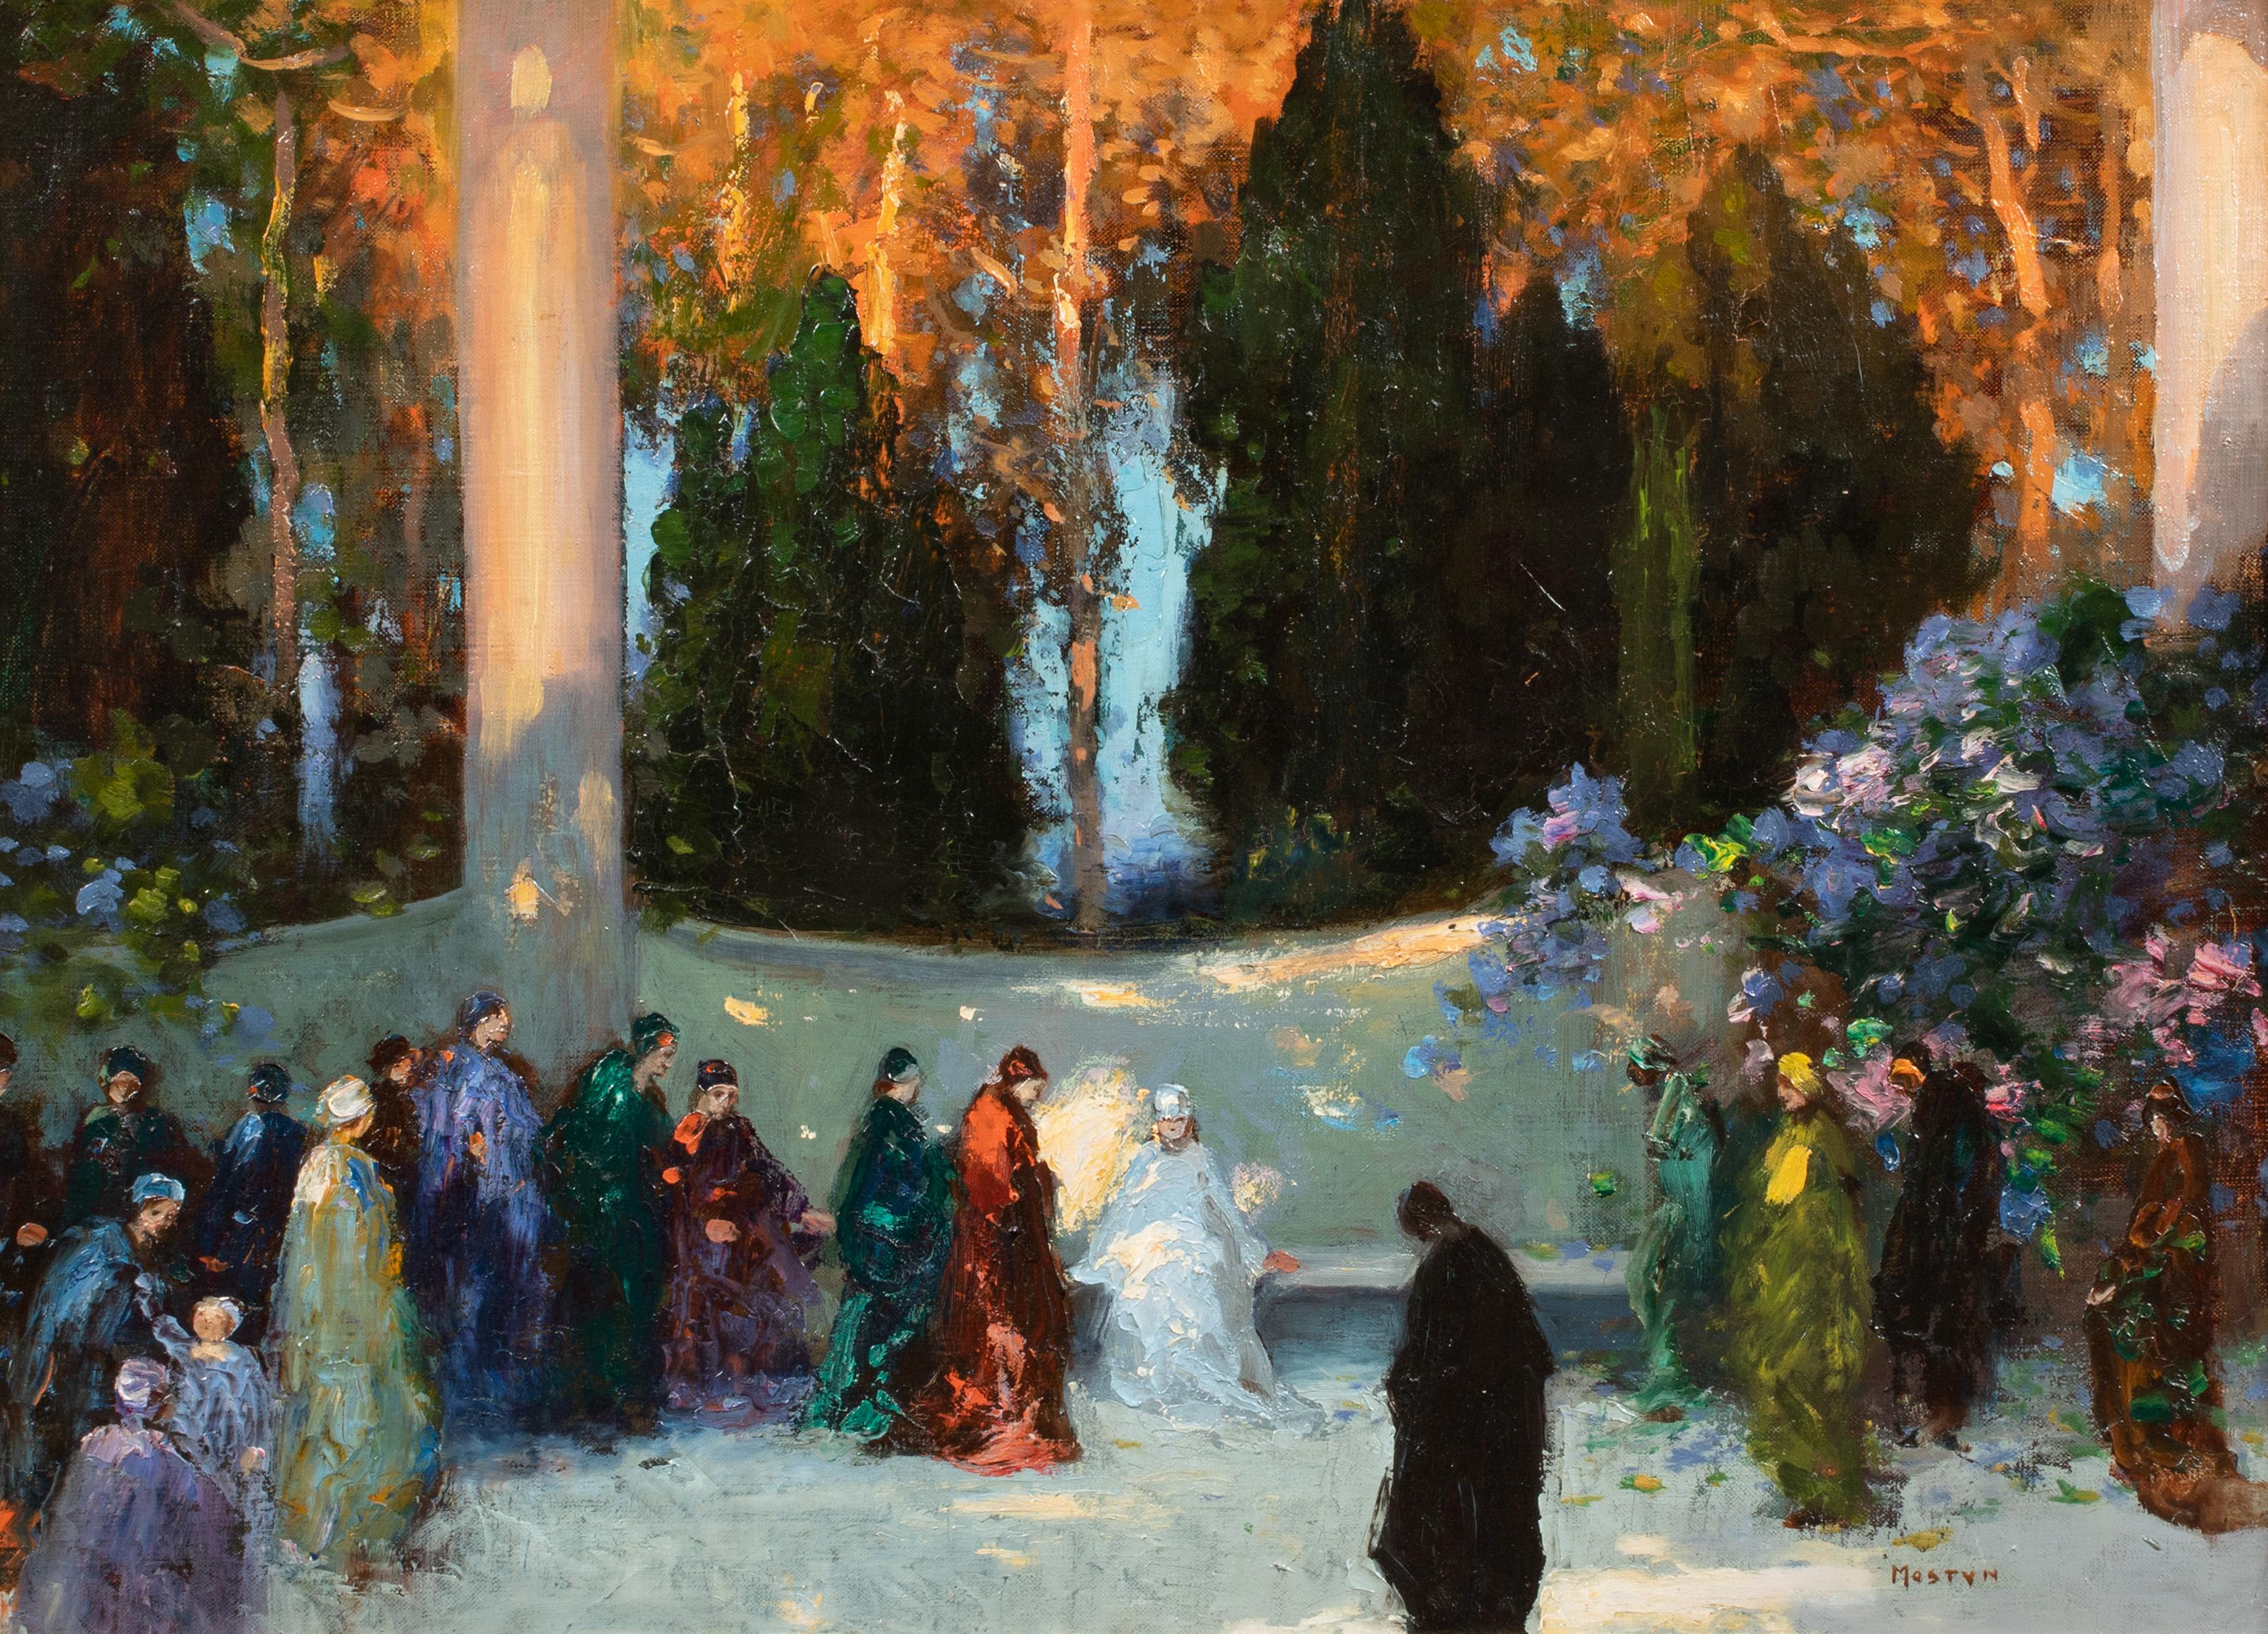 The Audience, circa 1900 - Painting by Thomas Edwin Mostyn